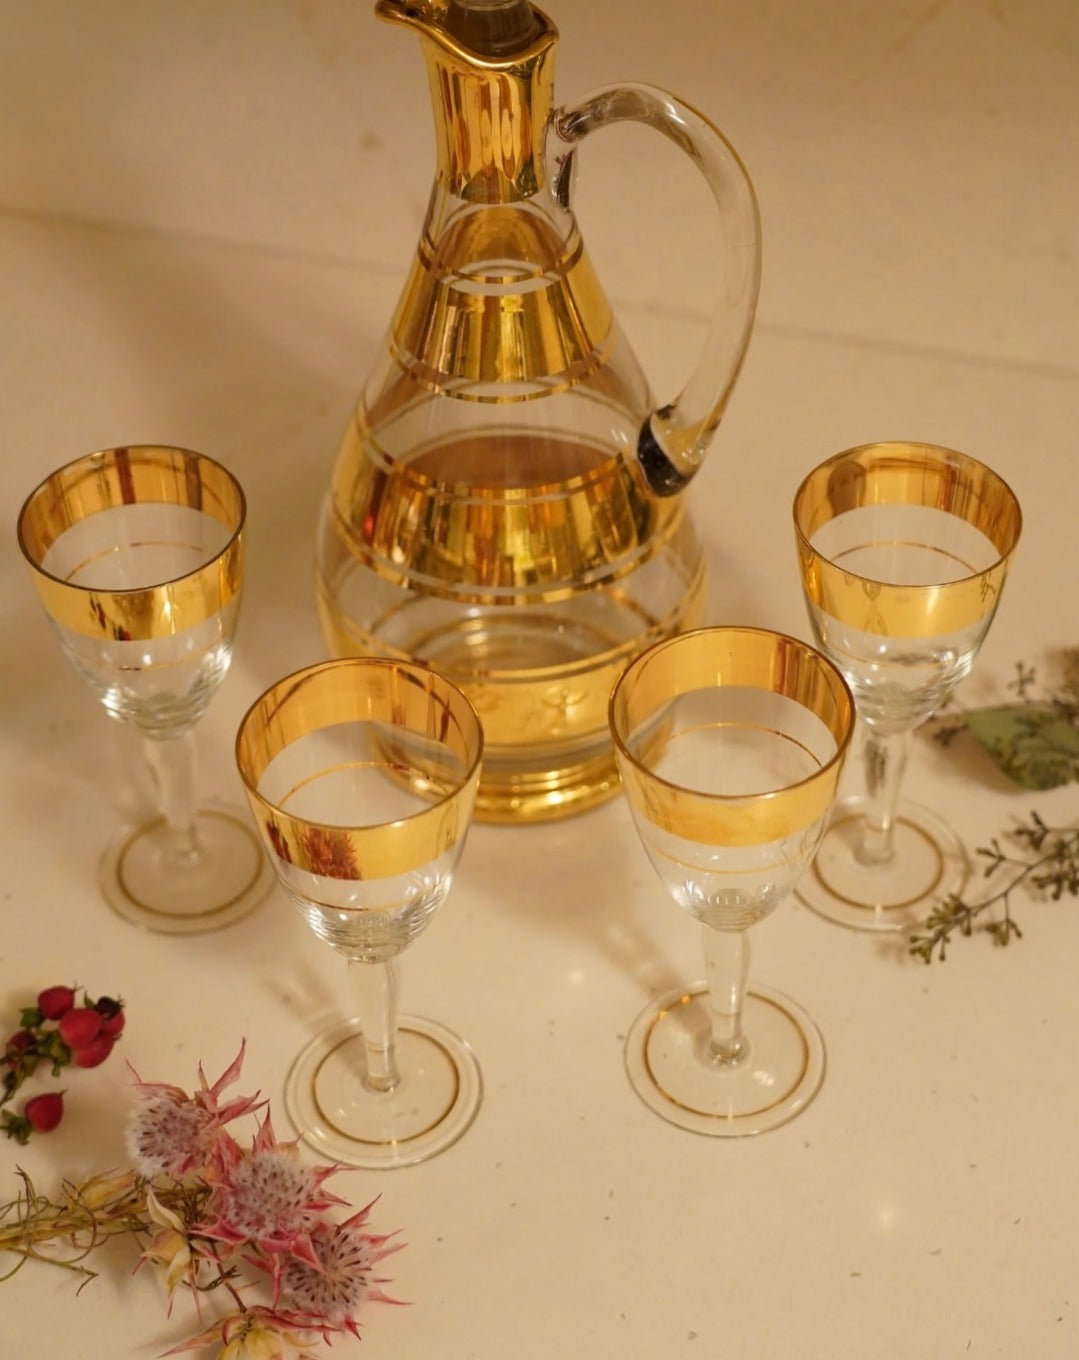 VINTAGE MID-CENTURY CRYSTAL DECANTER AND WINE GLASSES